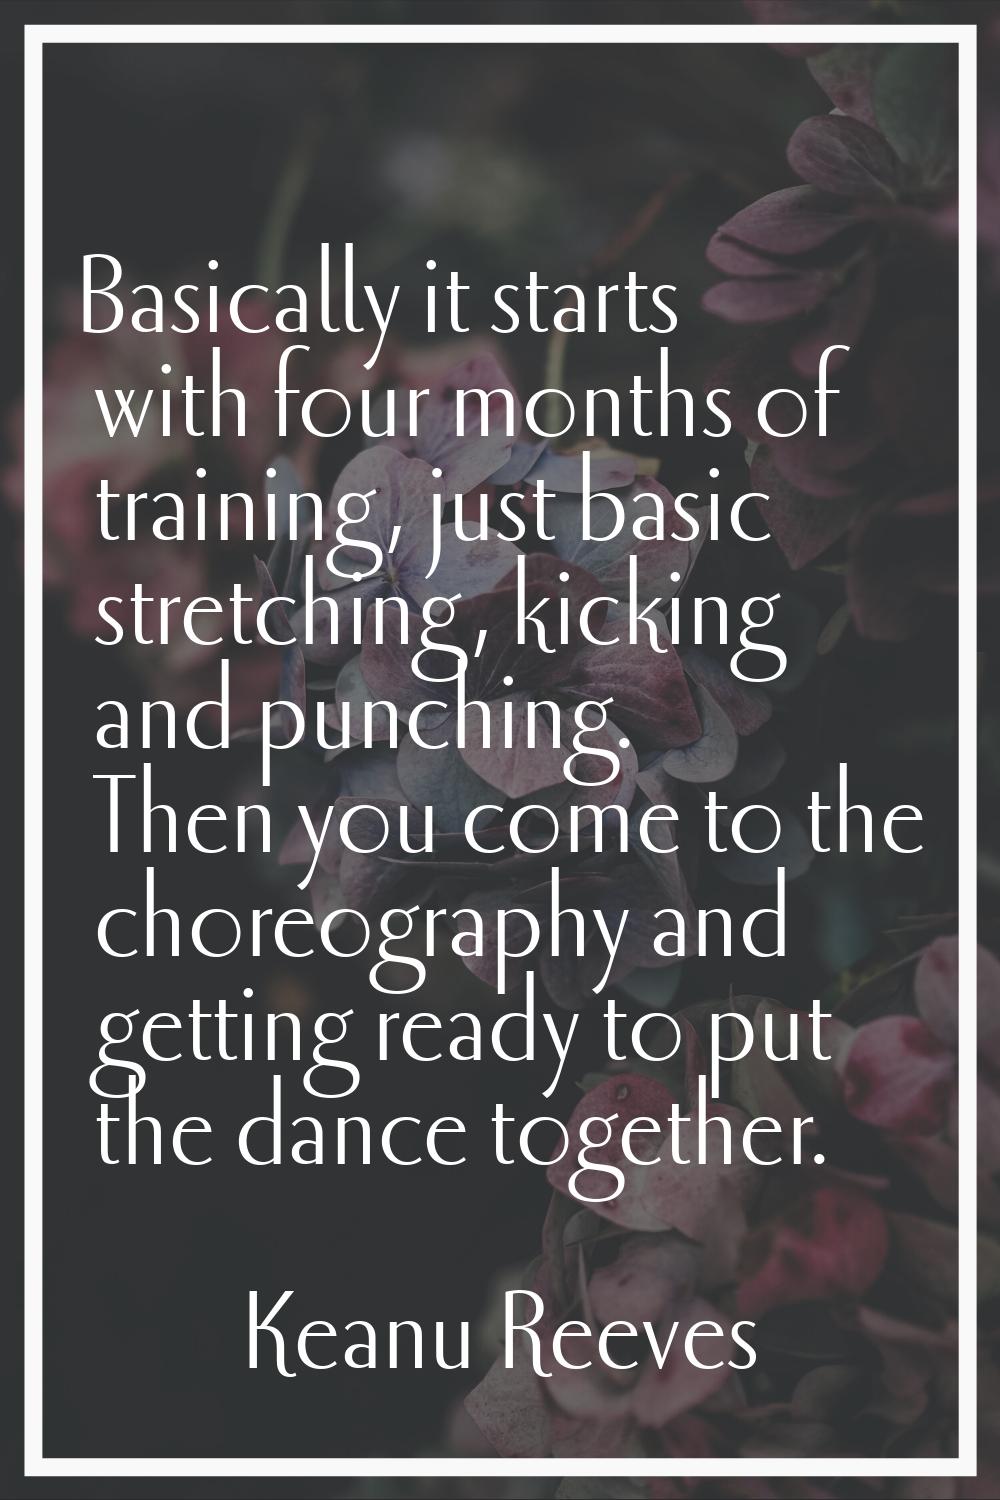 Basically it starts with four months of training, just basic stretching, kicking and punching. Then